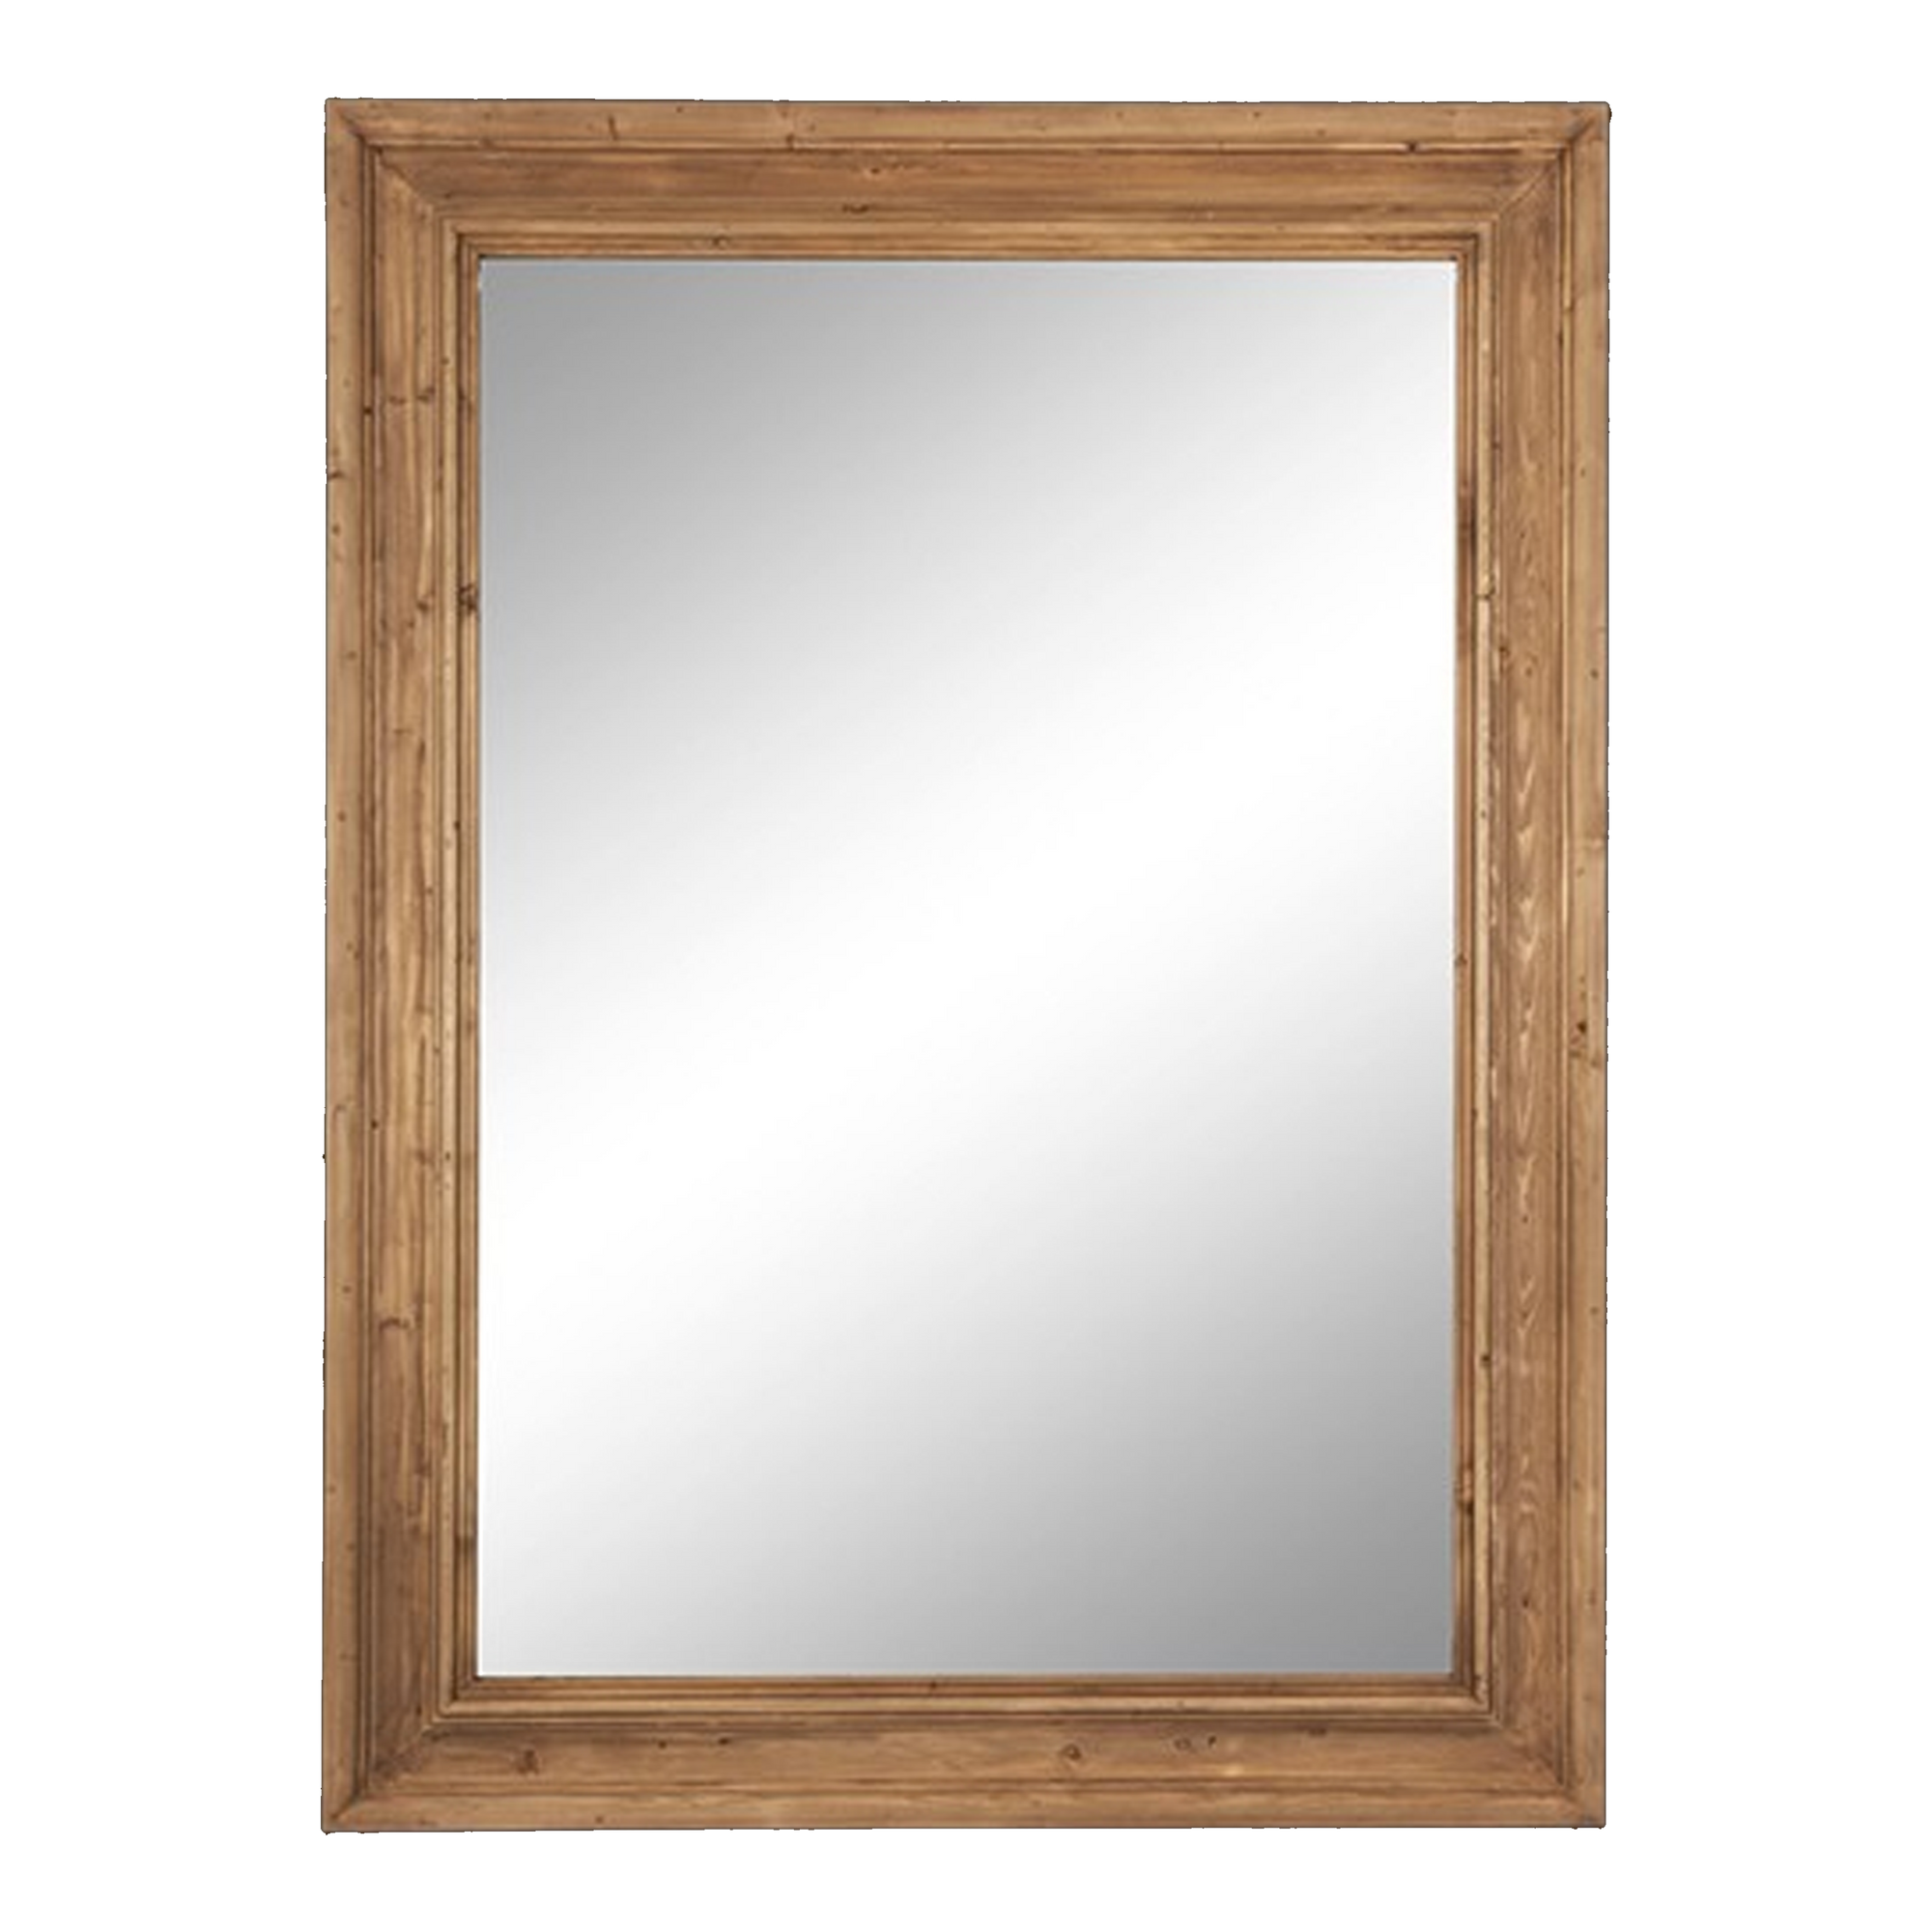 Made using a Victorian era period mould, this simple yet beautiful mirror is handcrafted in century-old Genuine English Reclaimed Timber, featuring an authentically weathered finis